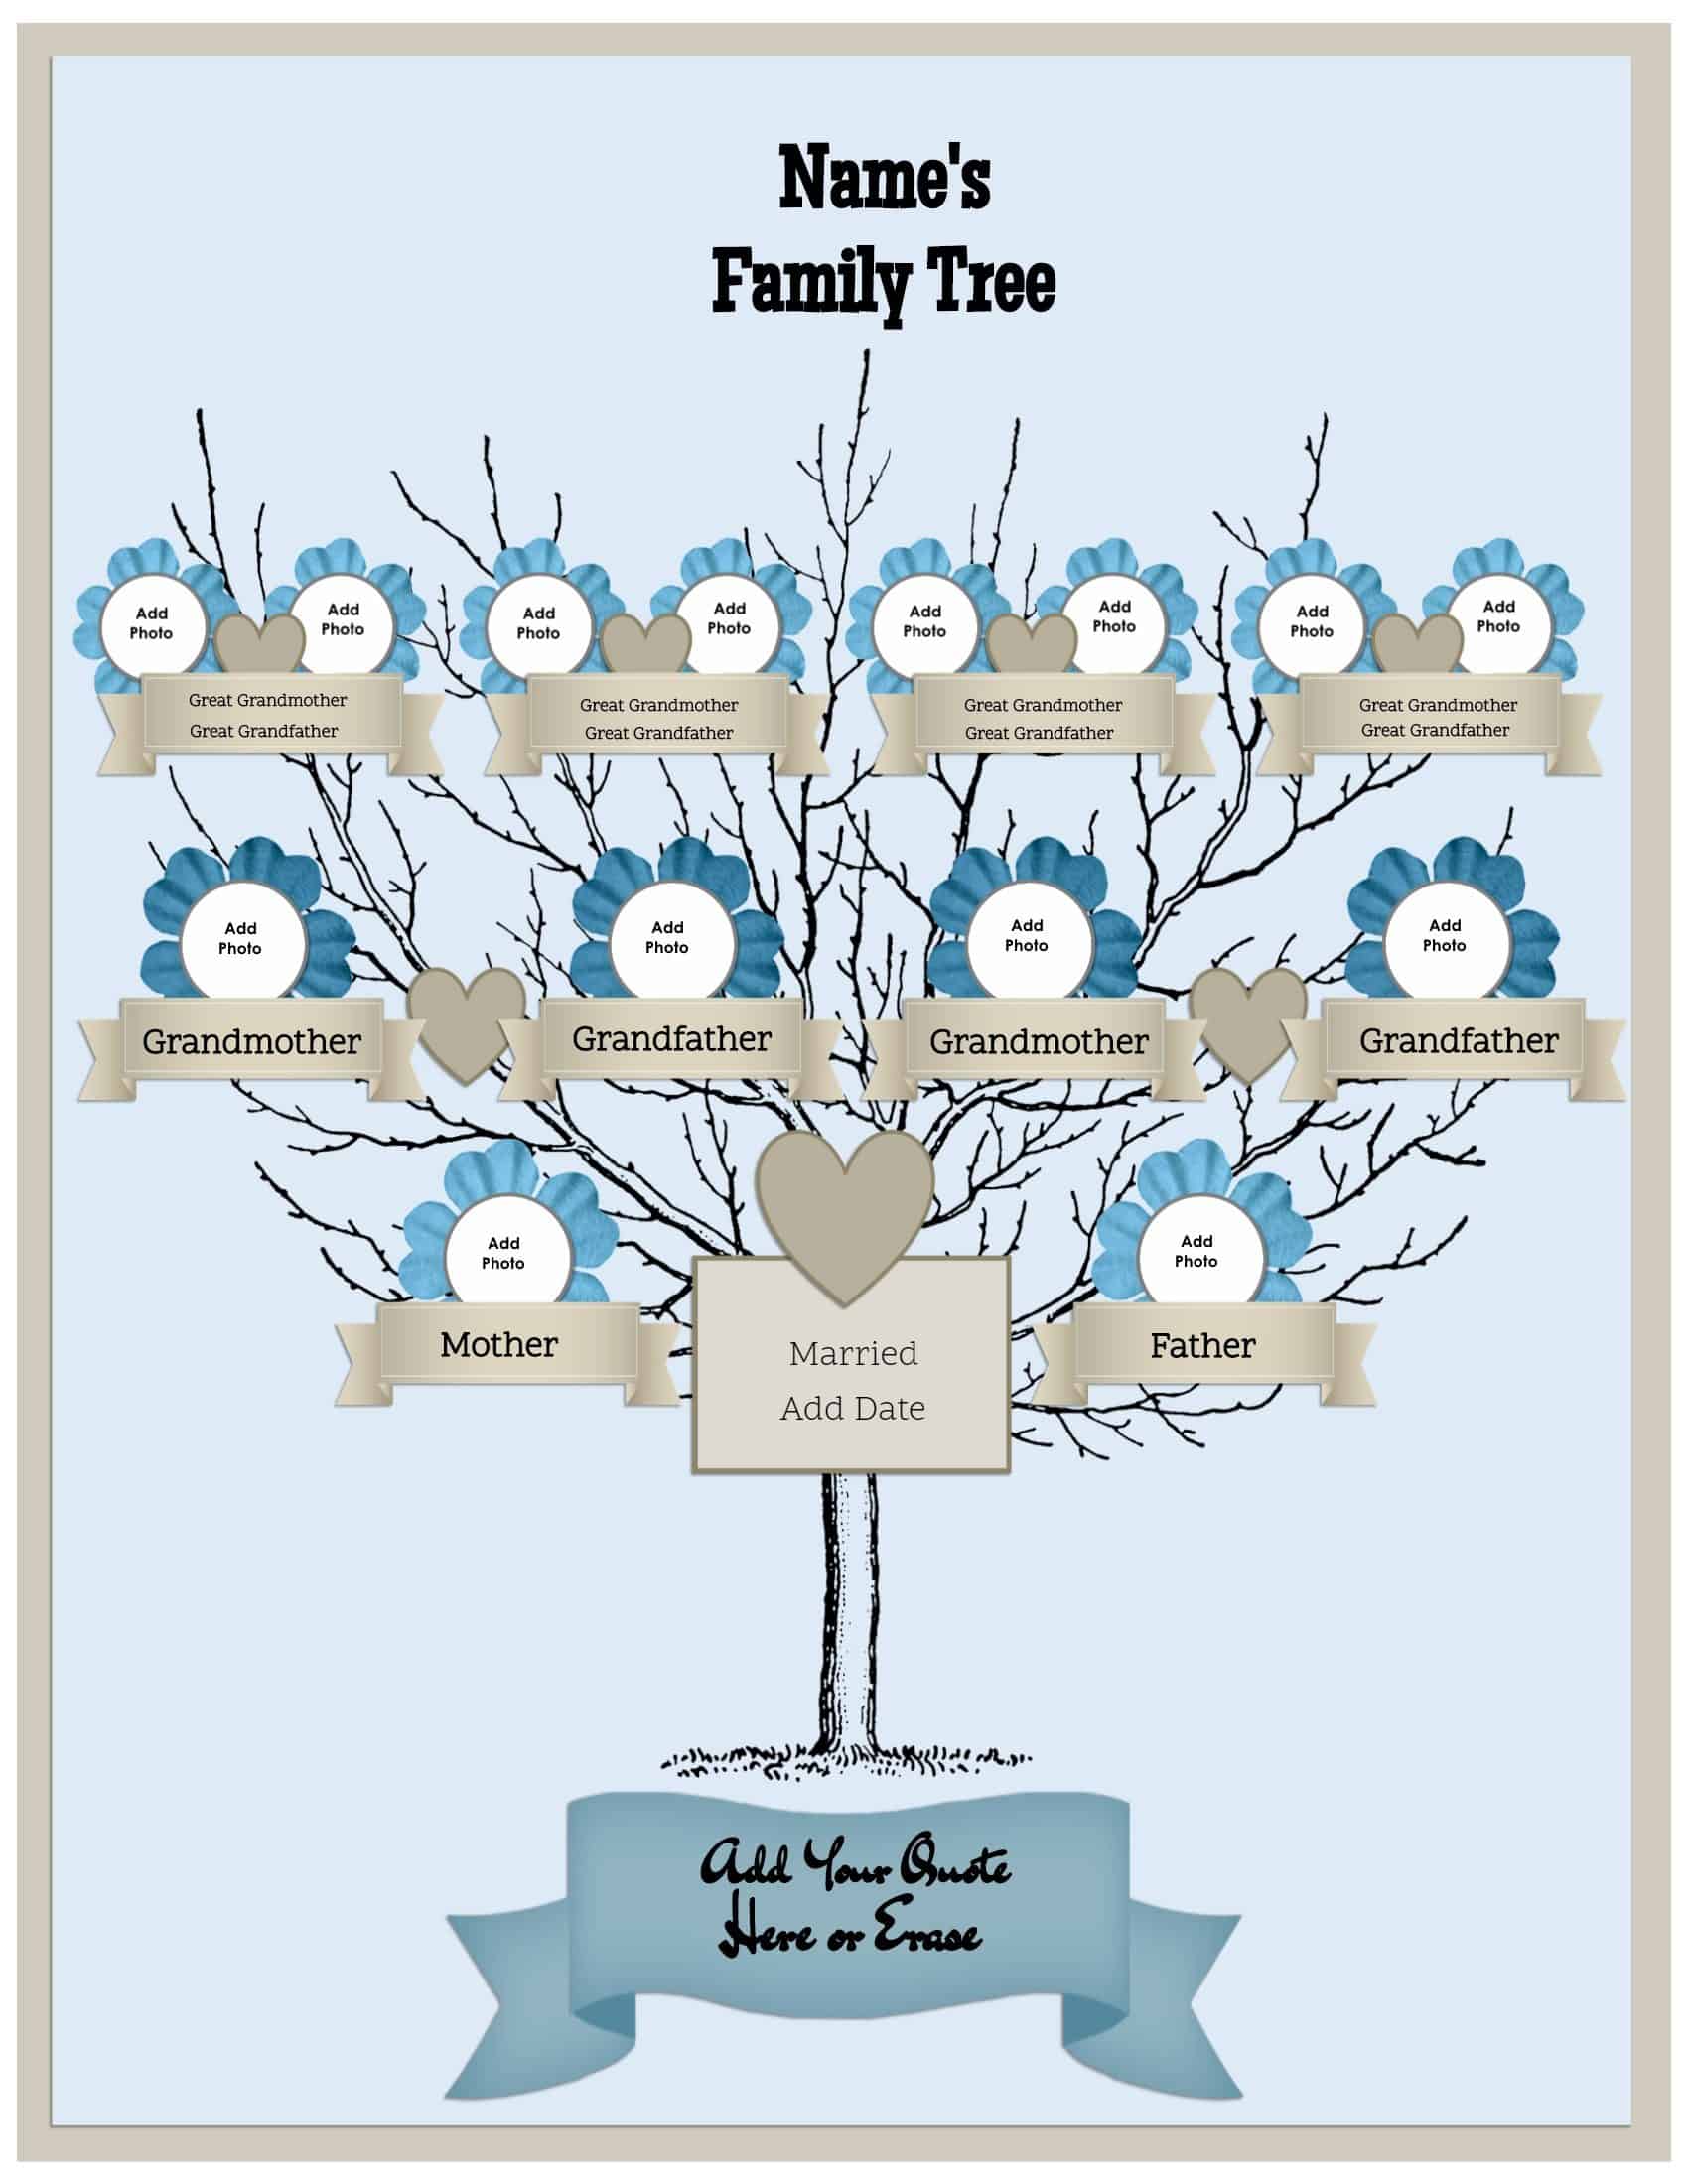 4 Generation Family Tree Template With Siblings